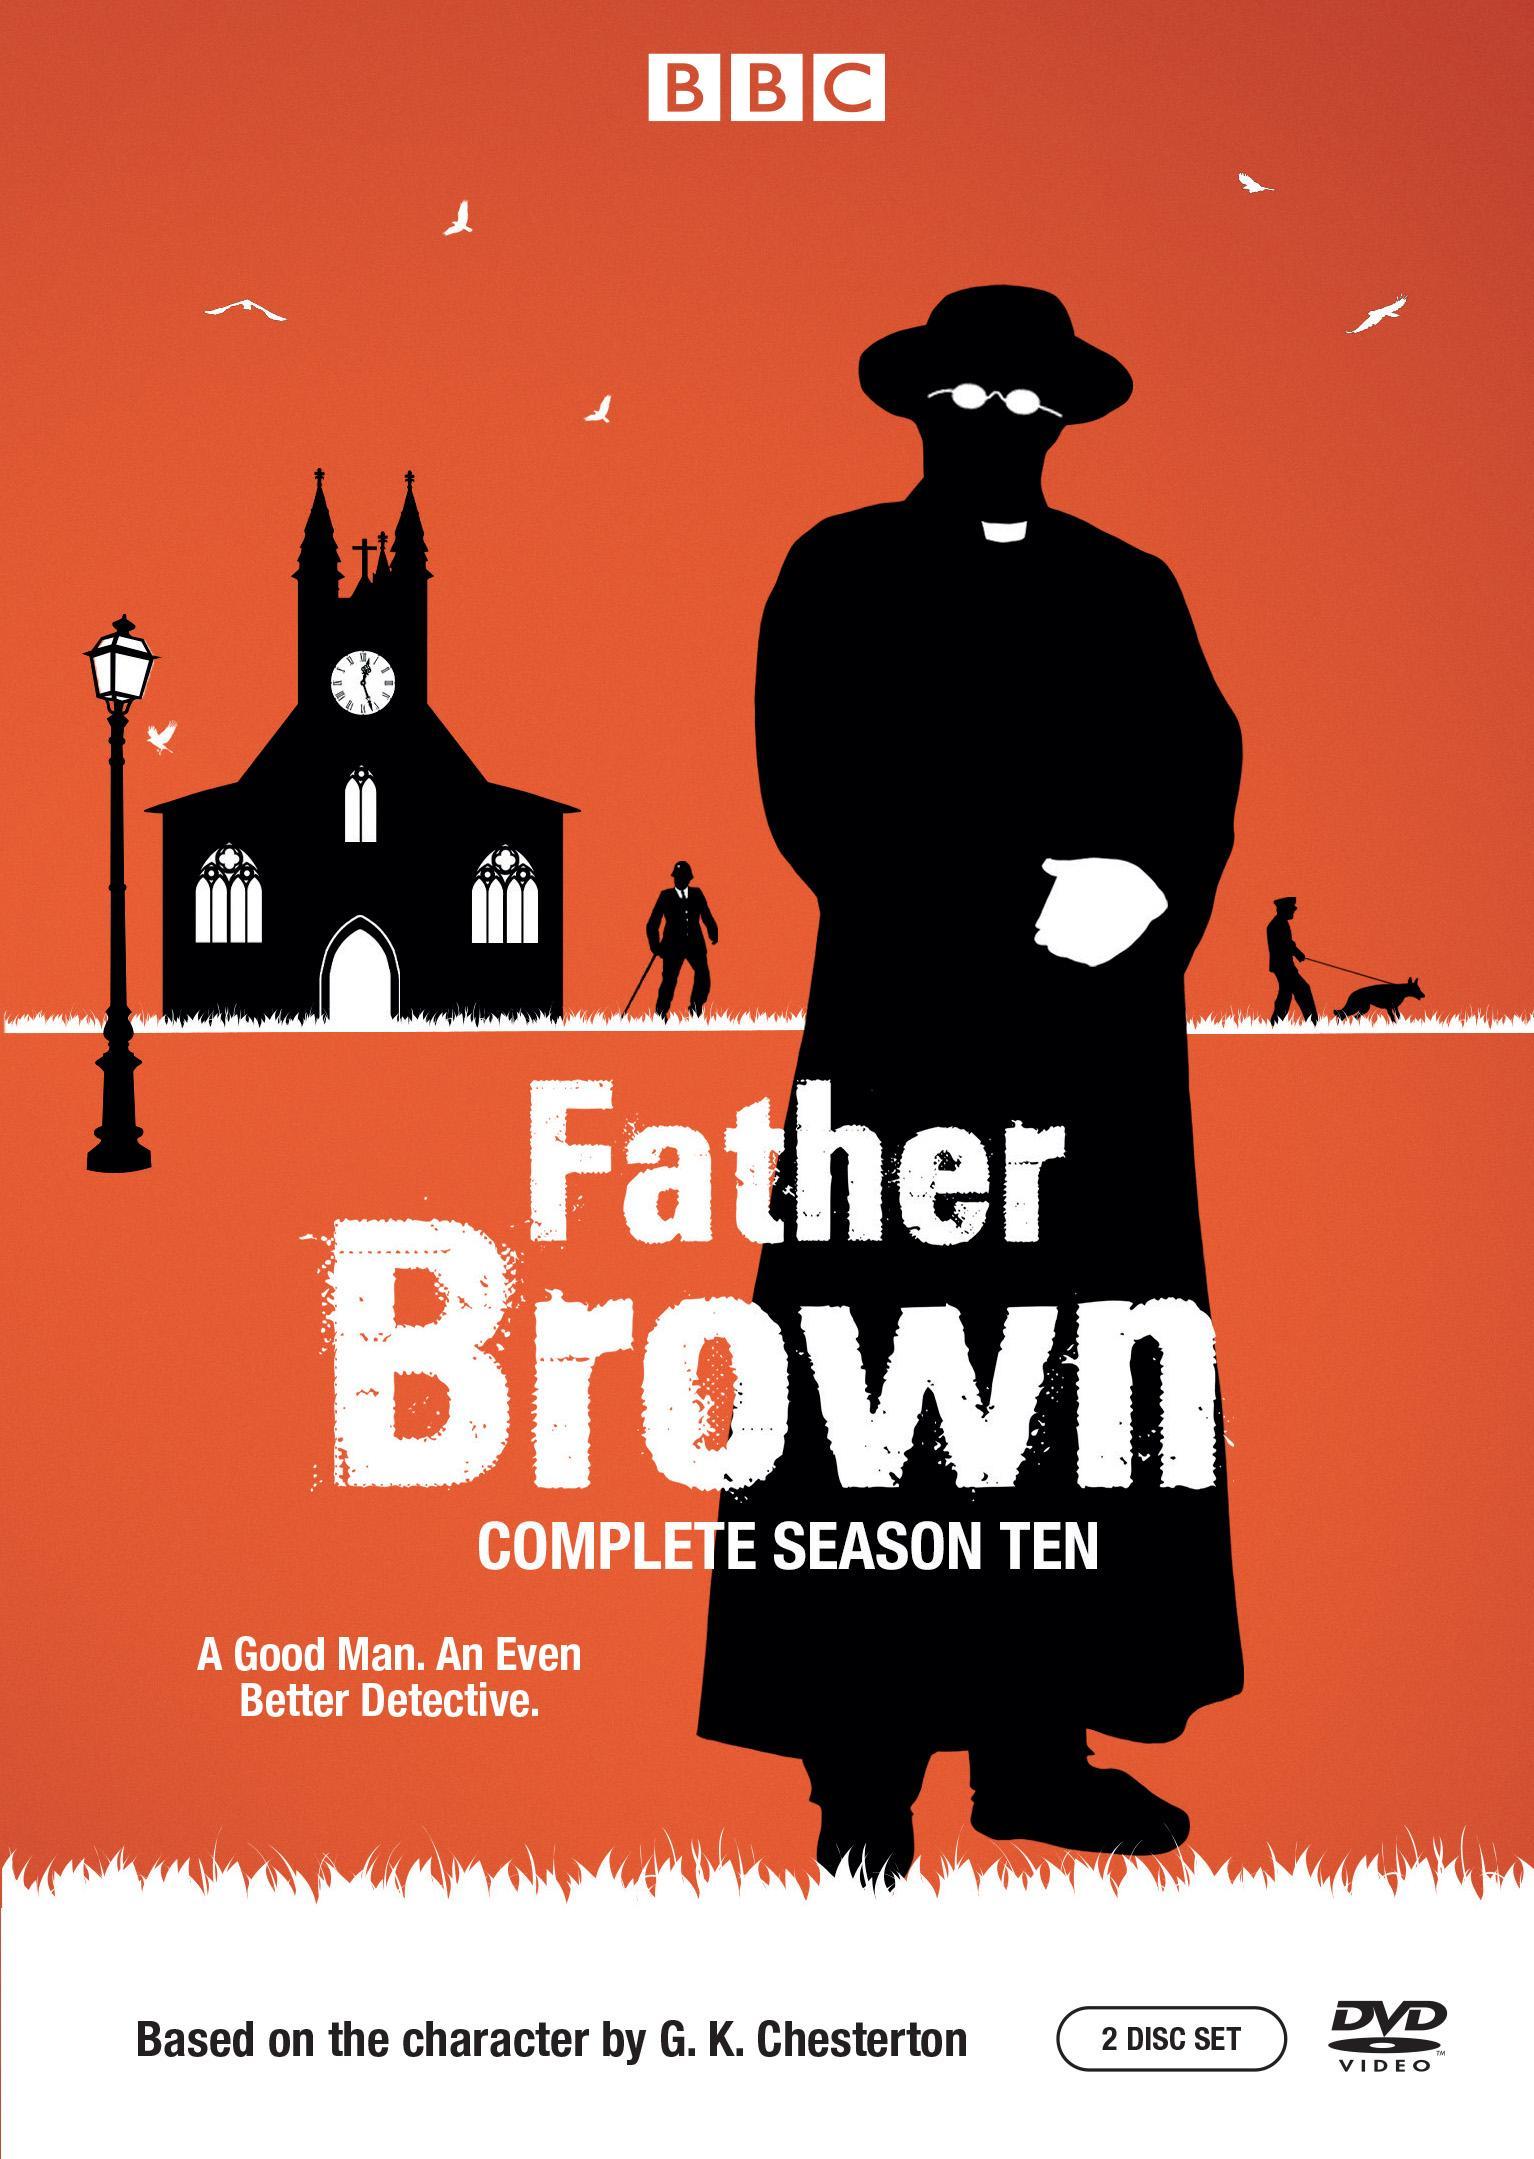 Father Brown: Complete Season Ten (DVD) - image 1 of 3